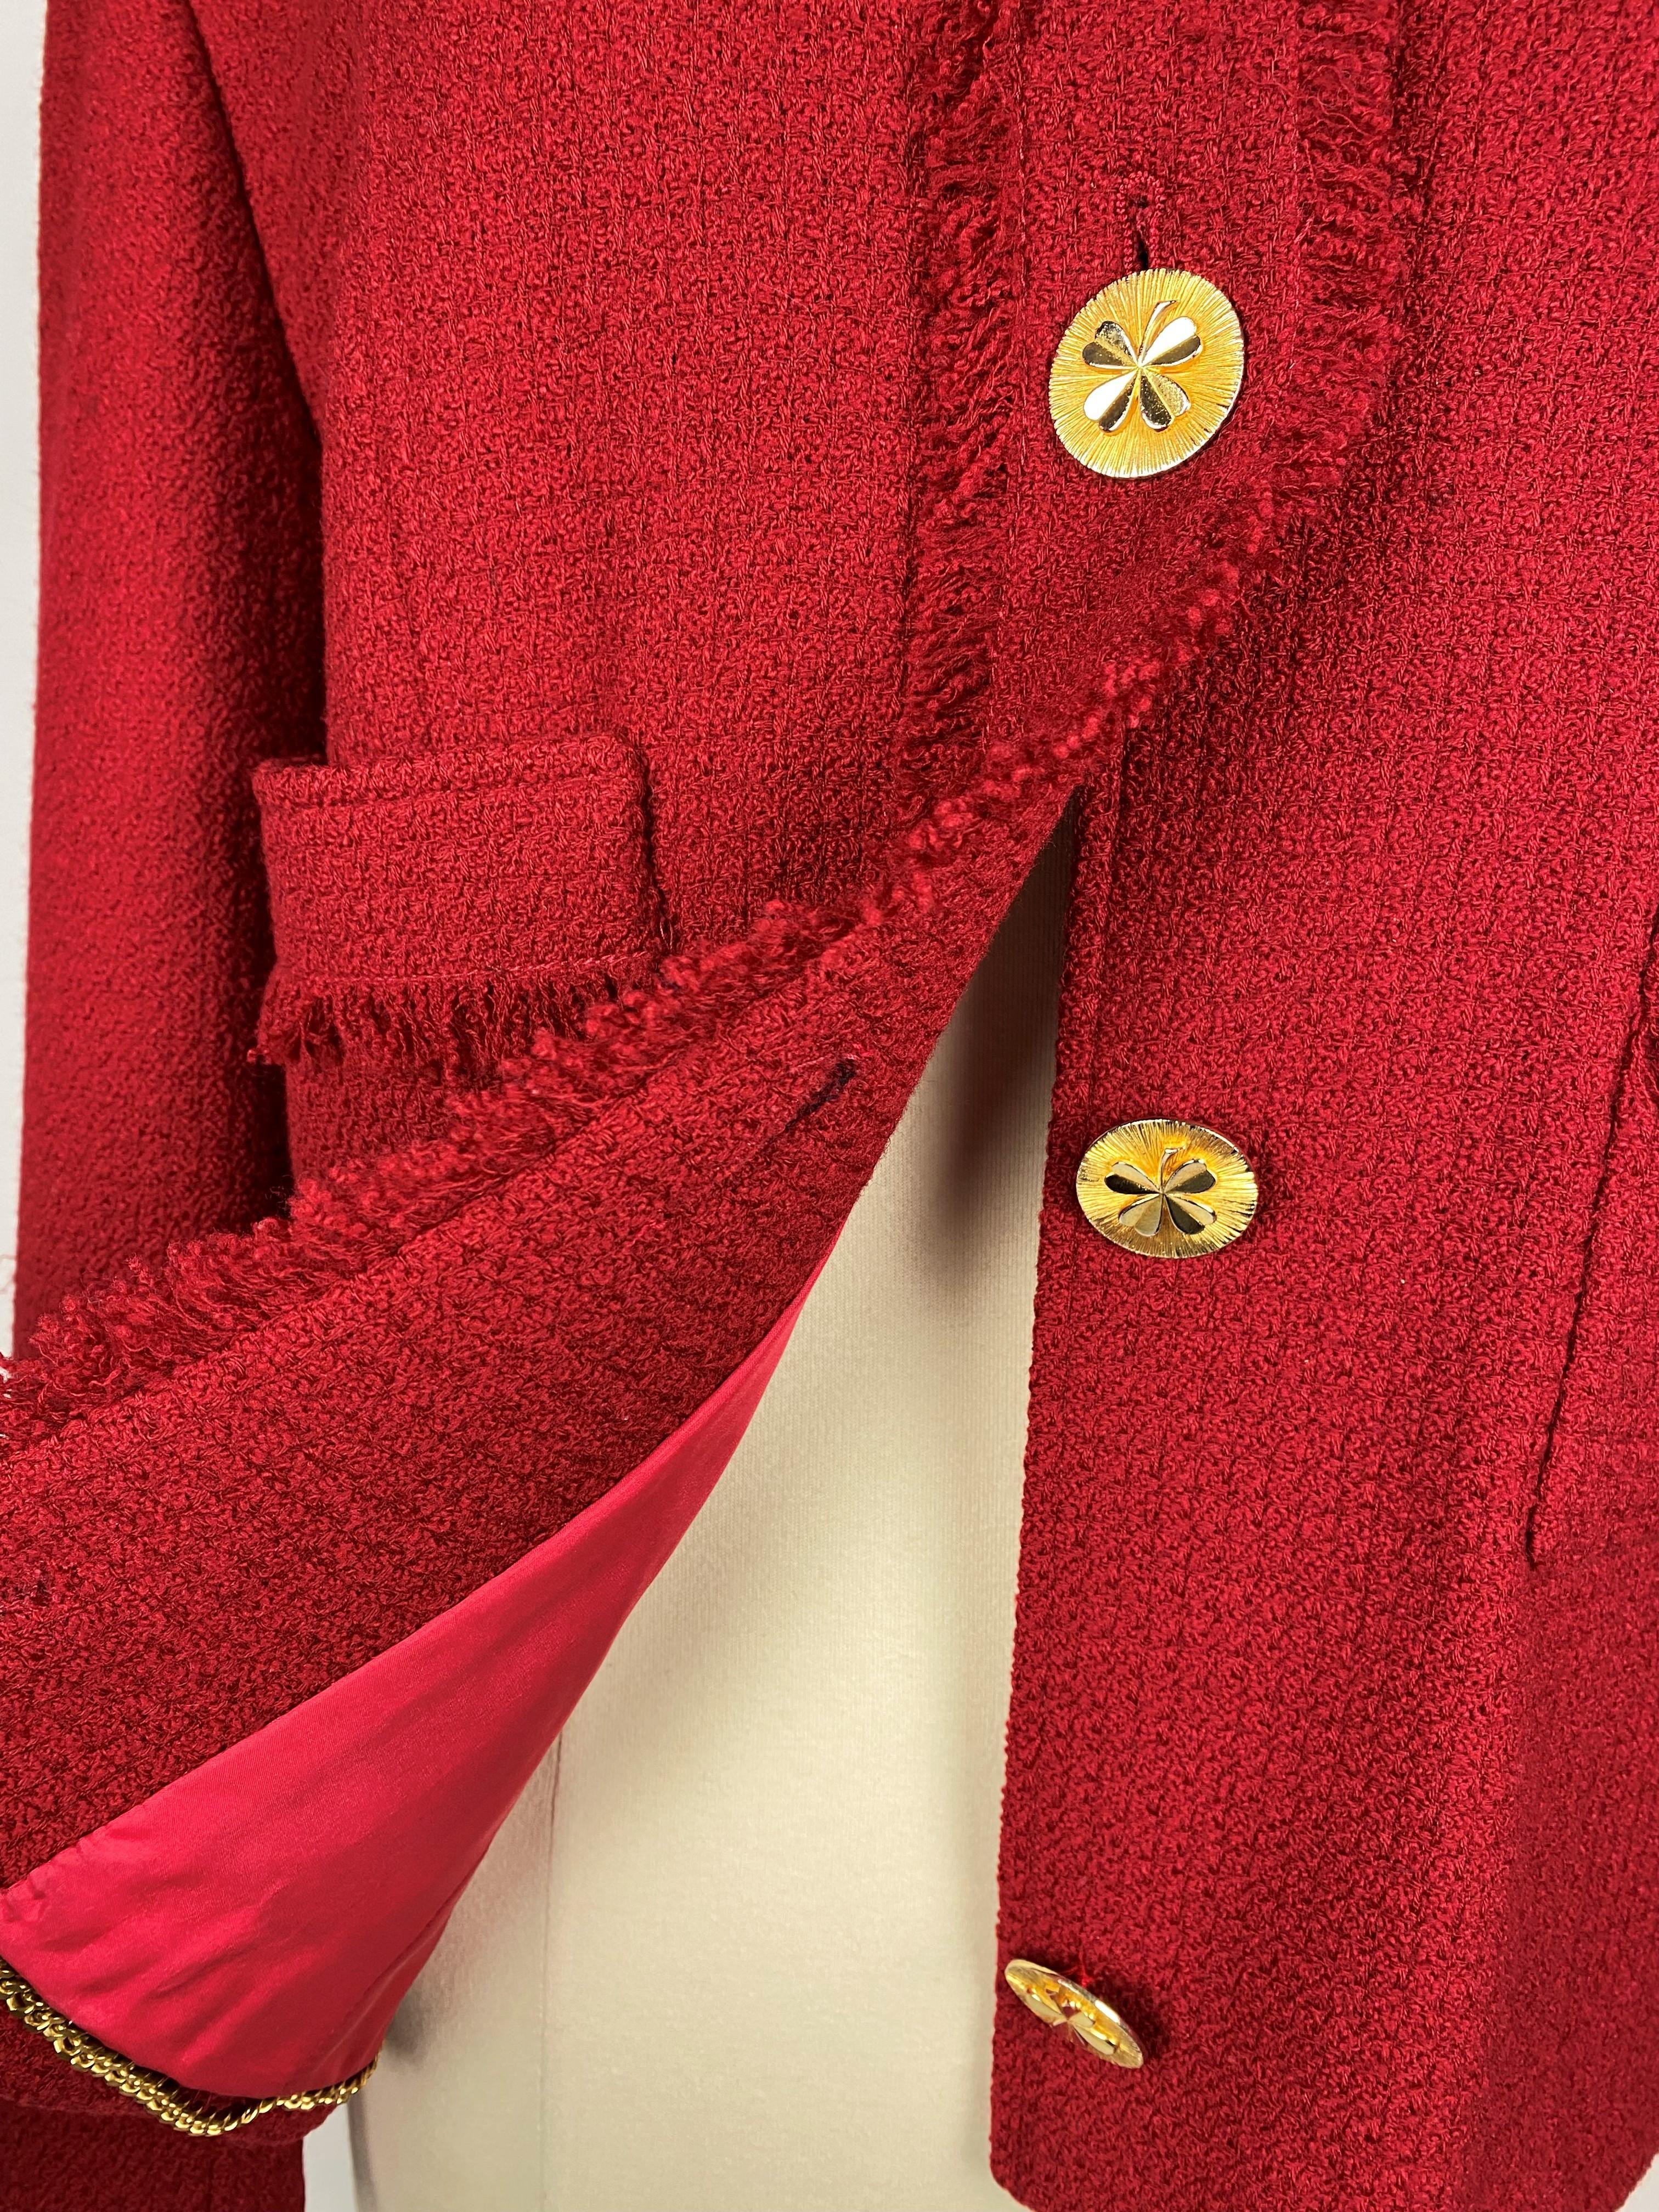 A Chanel - Karl Lagerfeld Red Mohair Wool Jacket Circa 1995-2000 For Sale 3